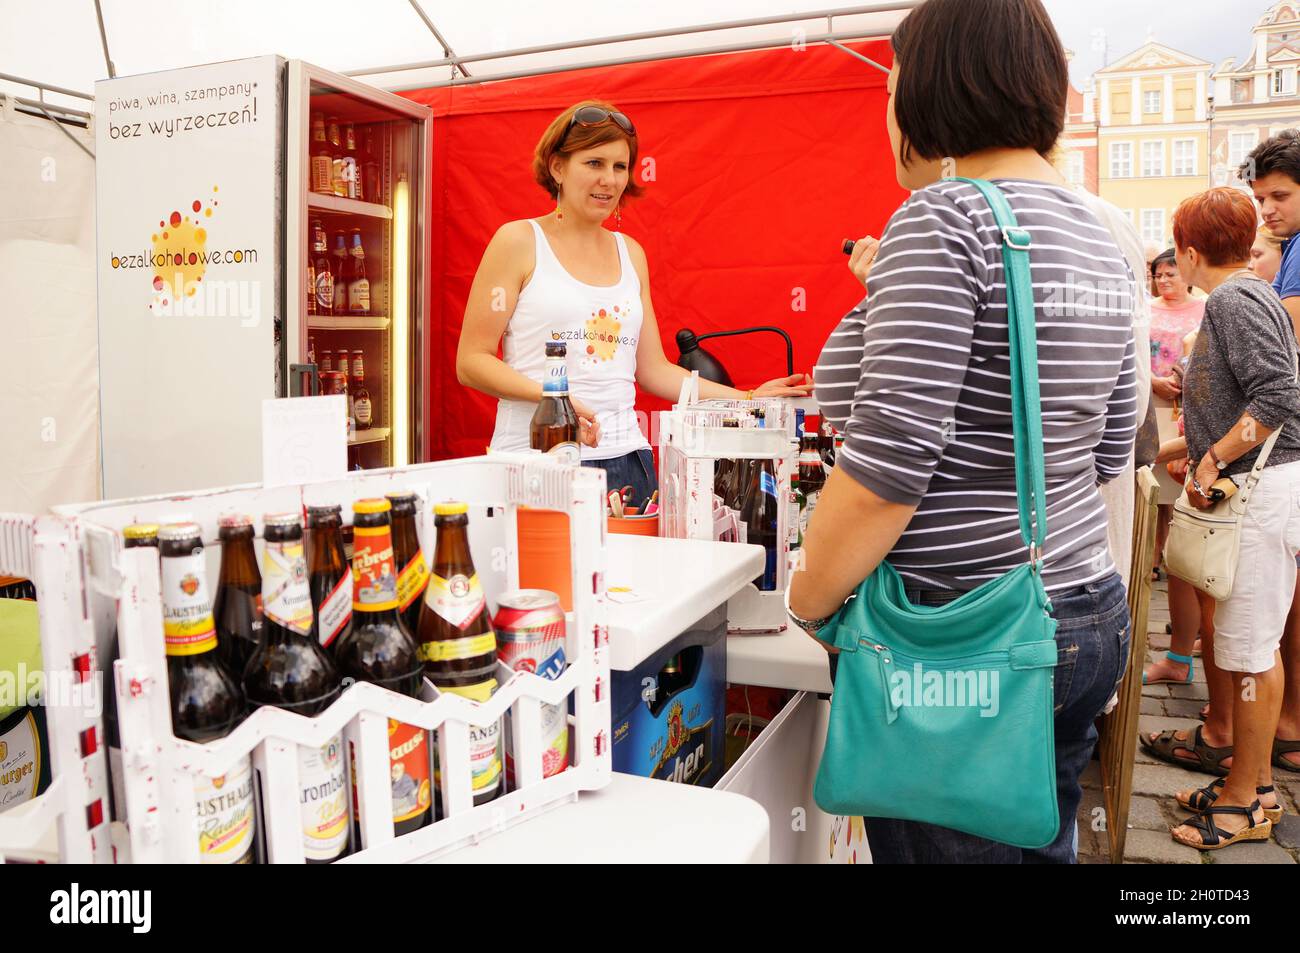 POZNAN, POLAND - Aug 15, 2013: A pregnant woman buying alcohol free beer during a food festival in the old city square Stock Photo